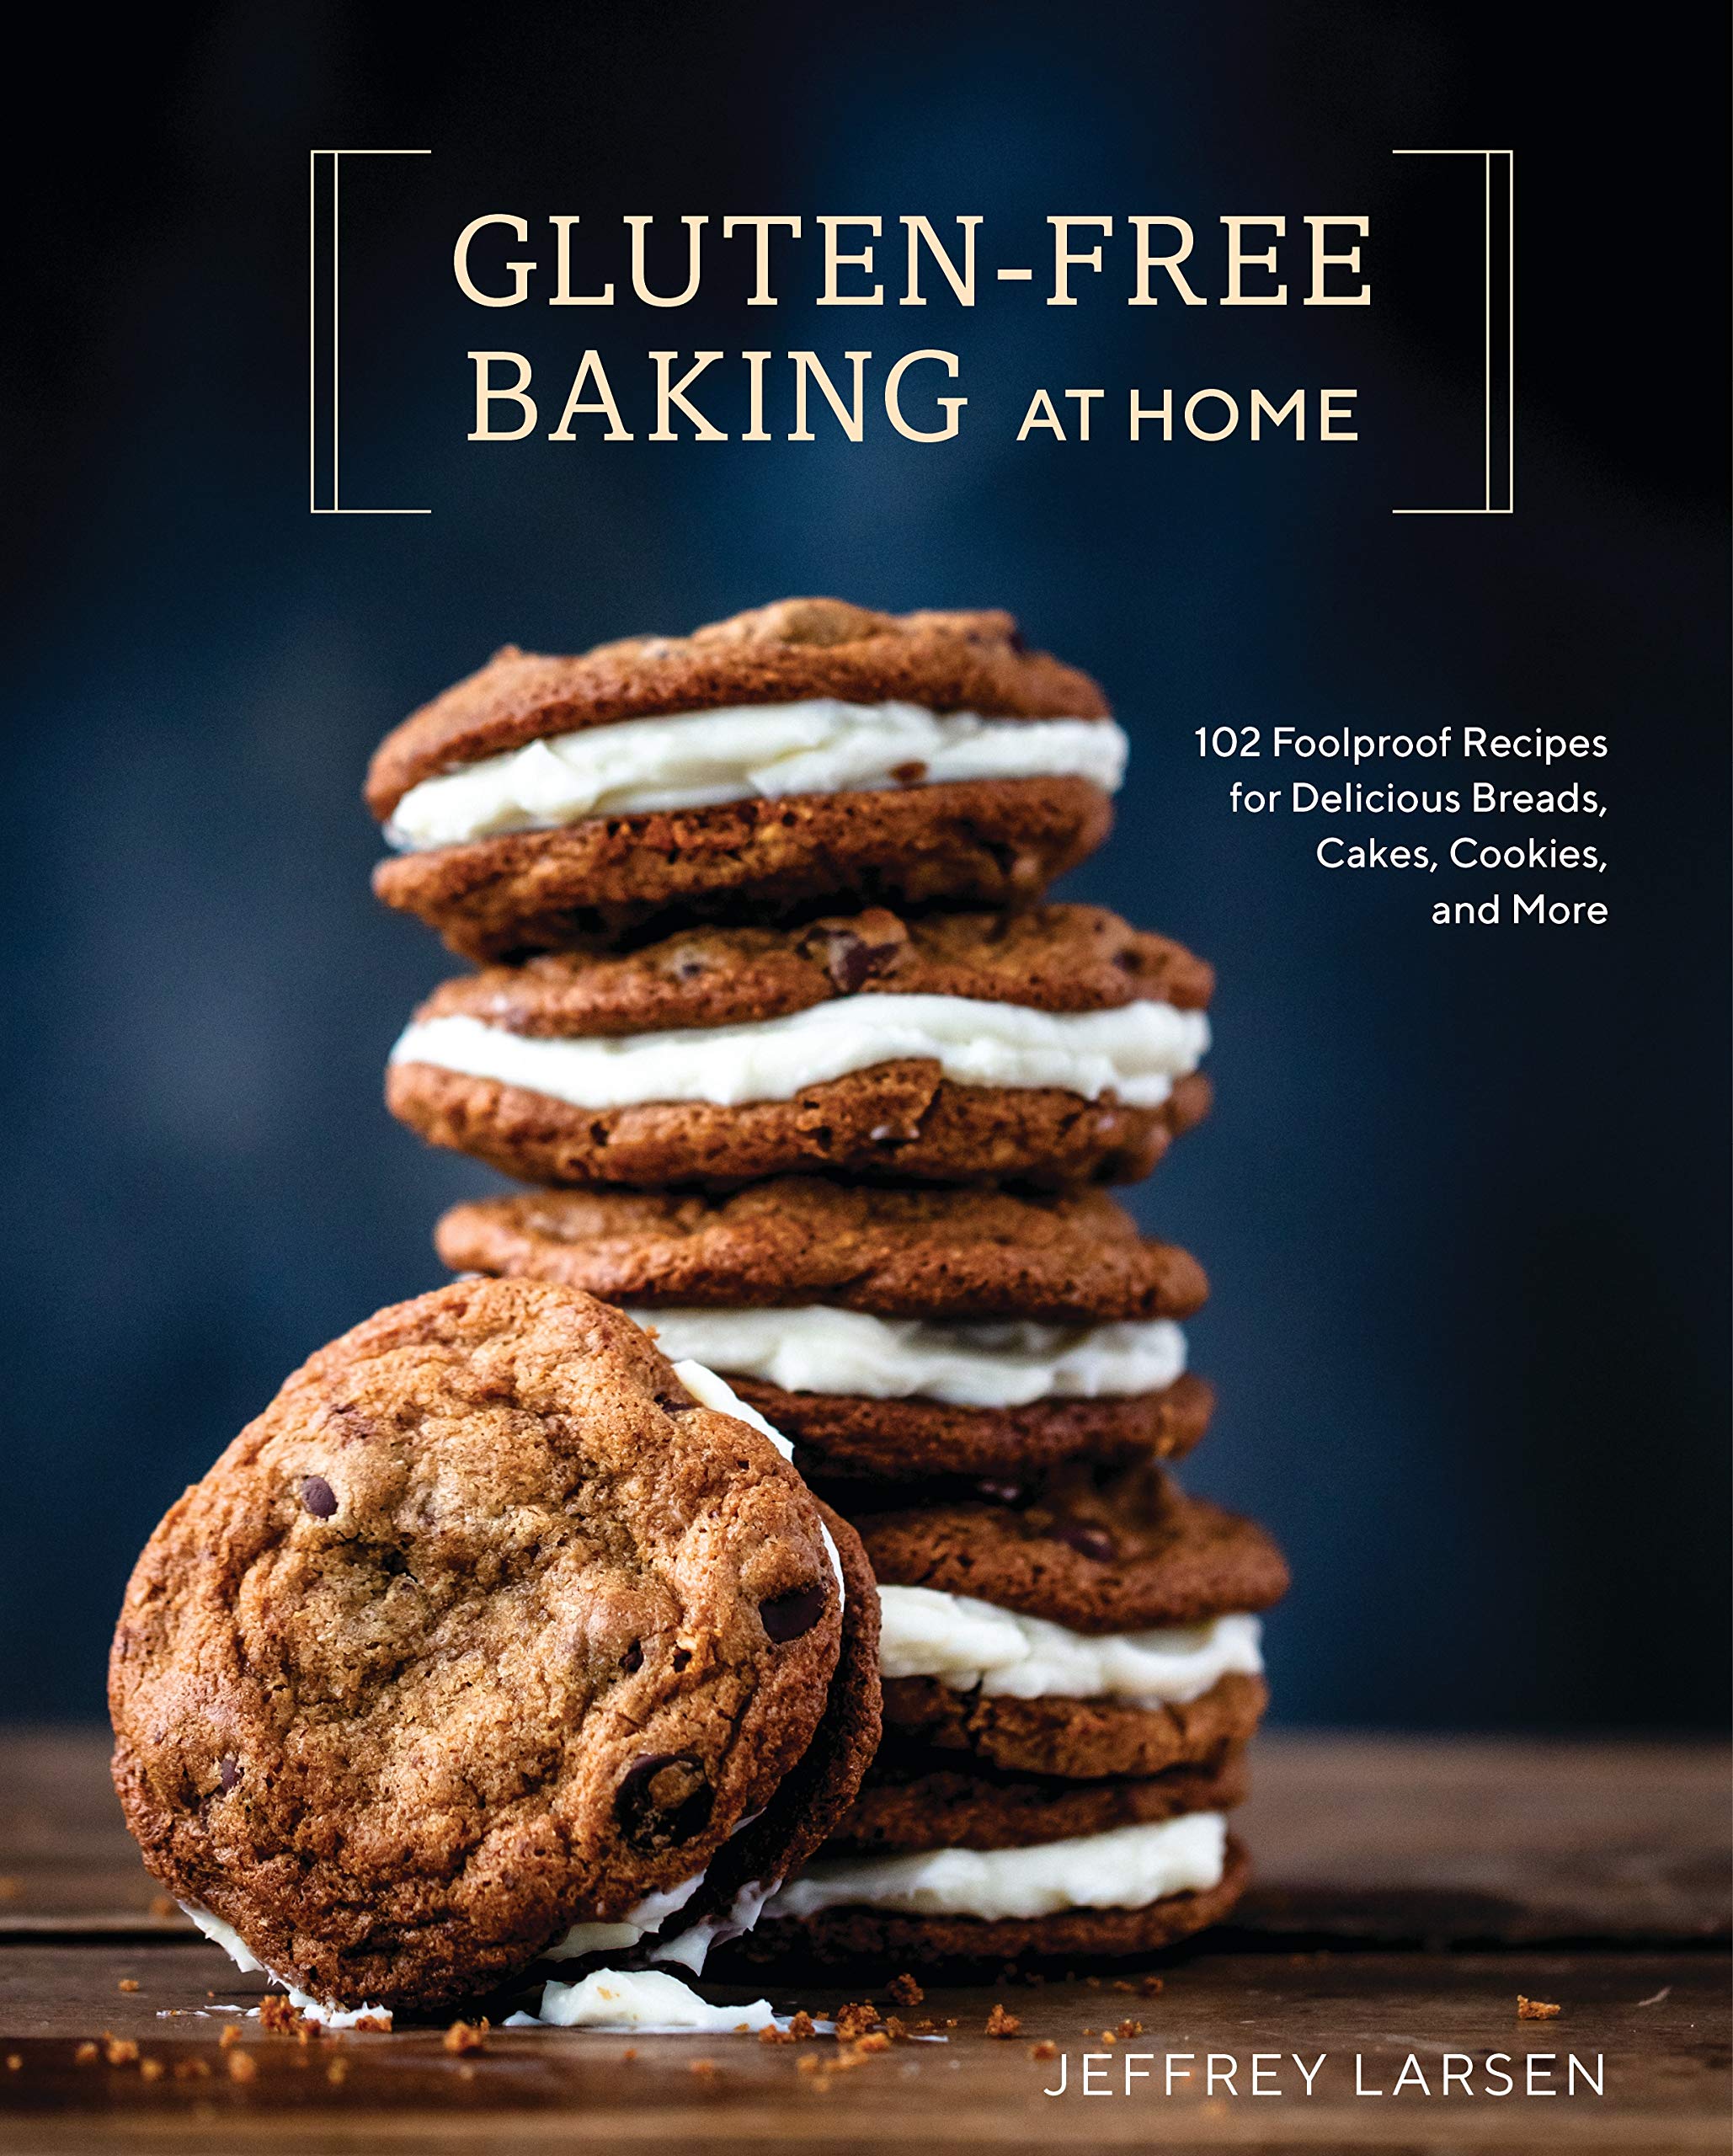 Gluten-Free Baking At Home: 102 Foolproof Recipes for Delicious Breads, Cakes, Cookies, and More (Jeffrey Larsen)